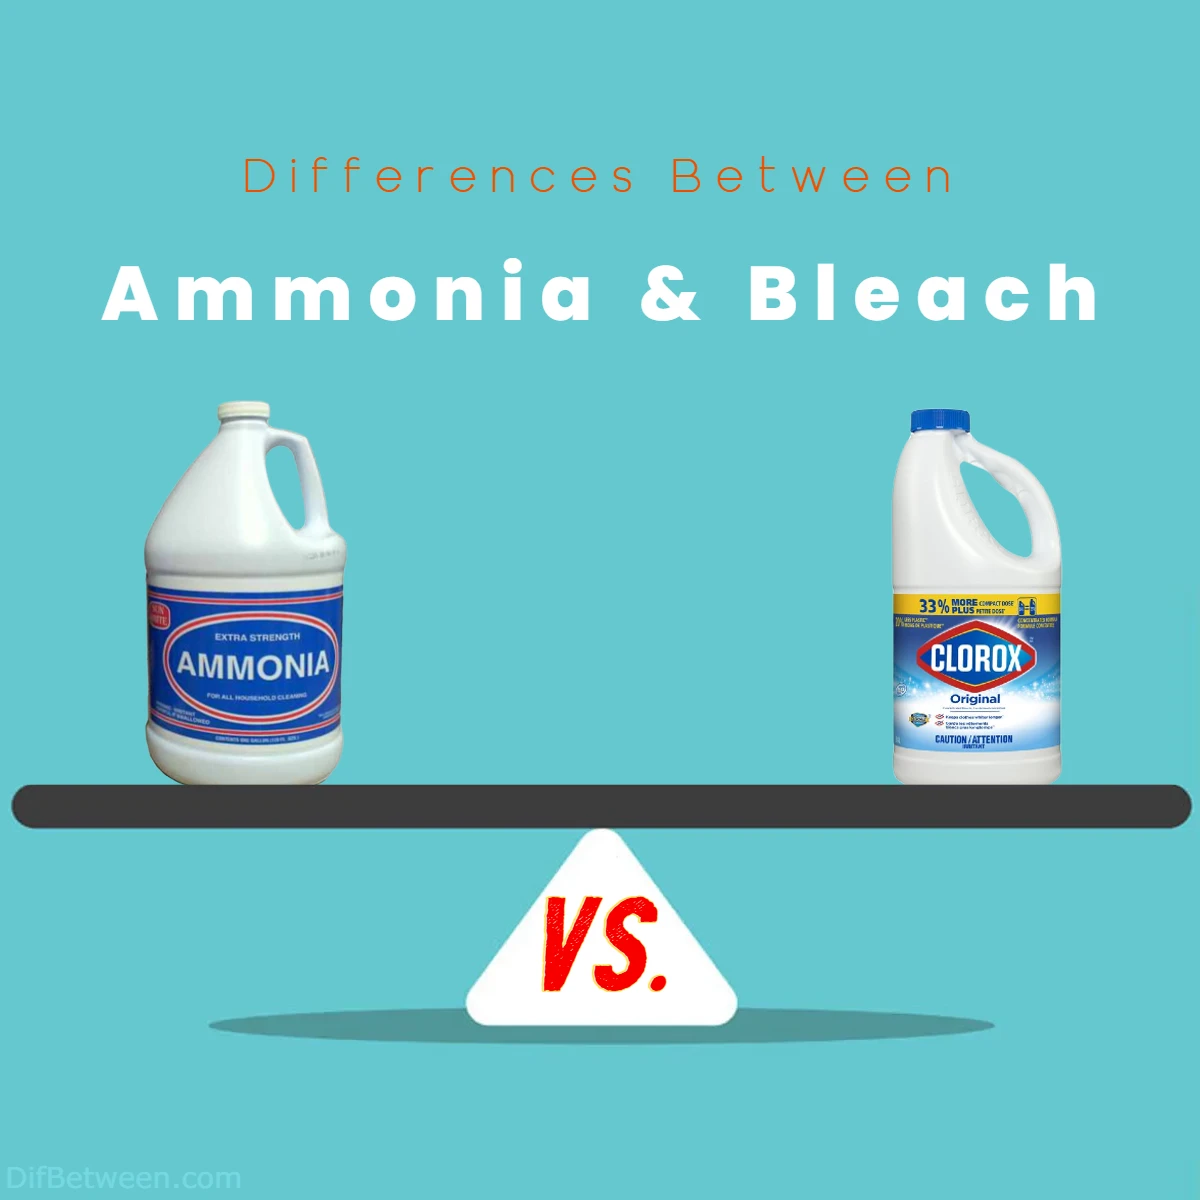 Differences Between Ammonia vs Bleach